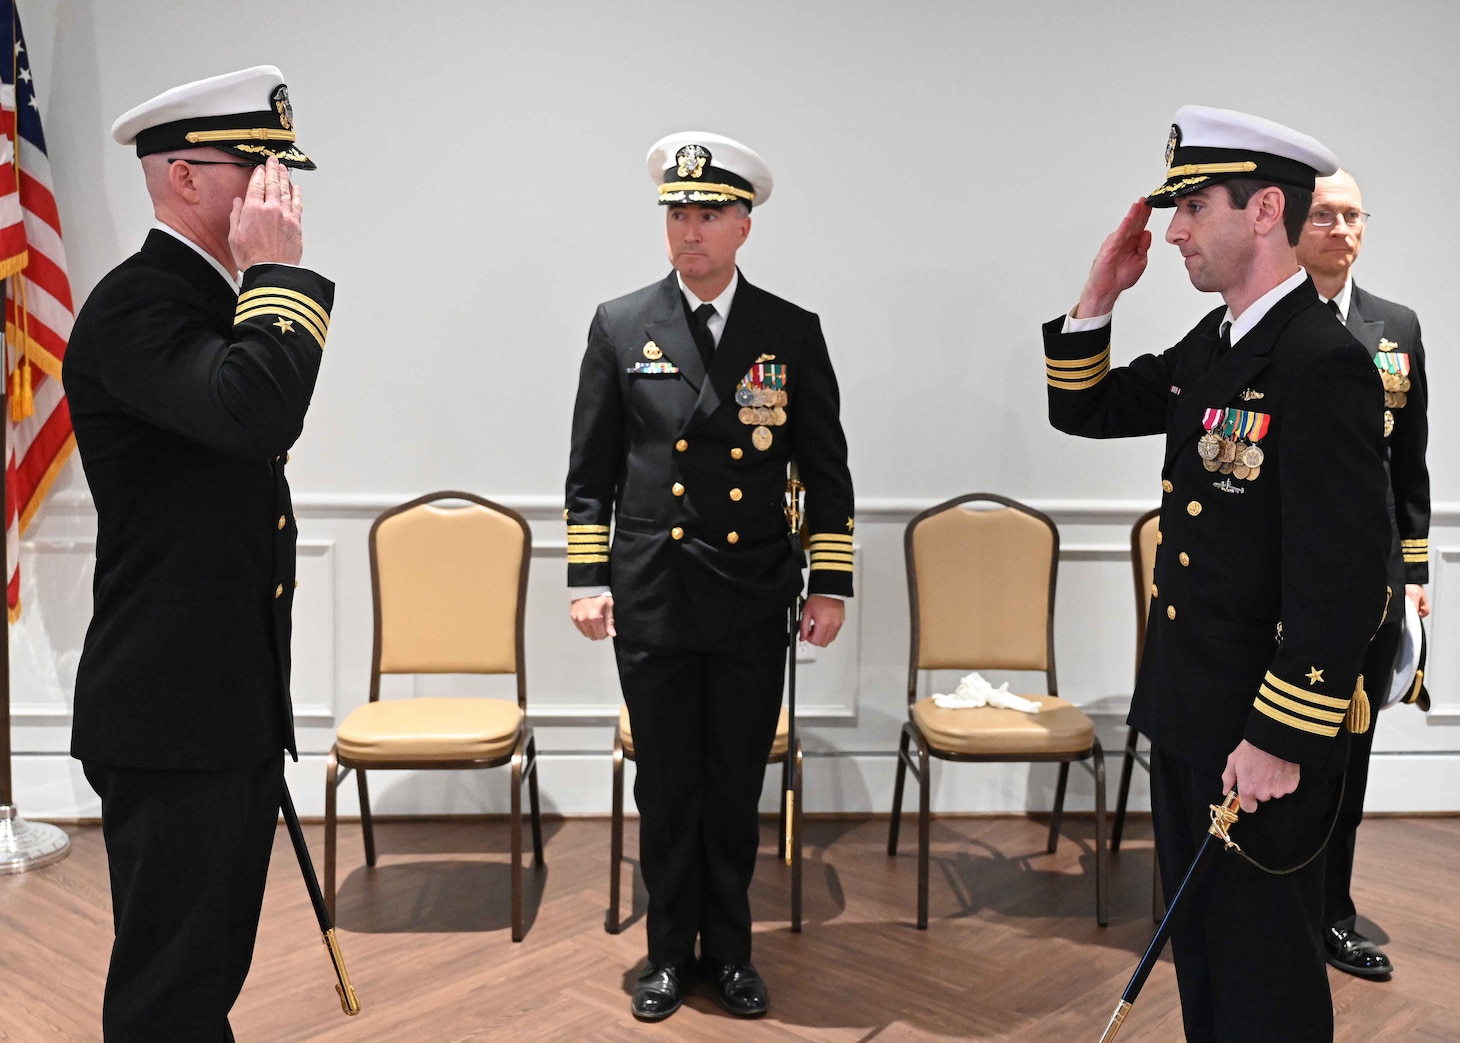 Cmdr. Russell Jones, left, relieves  Cmdr. Matthew Brouillard, right, as commanding officer of the Los Angeles-class fast-attack submarine USS Columbus (SSN 762), during a change of command ceremony at the Mariner’s Museum and Park in Newport News, Virginia.